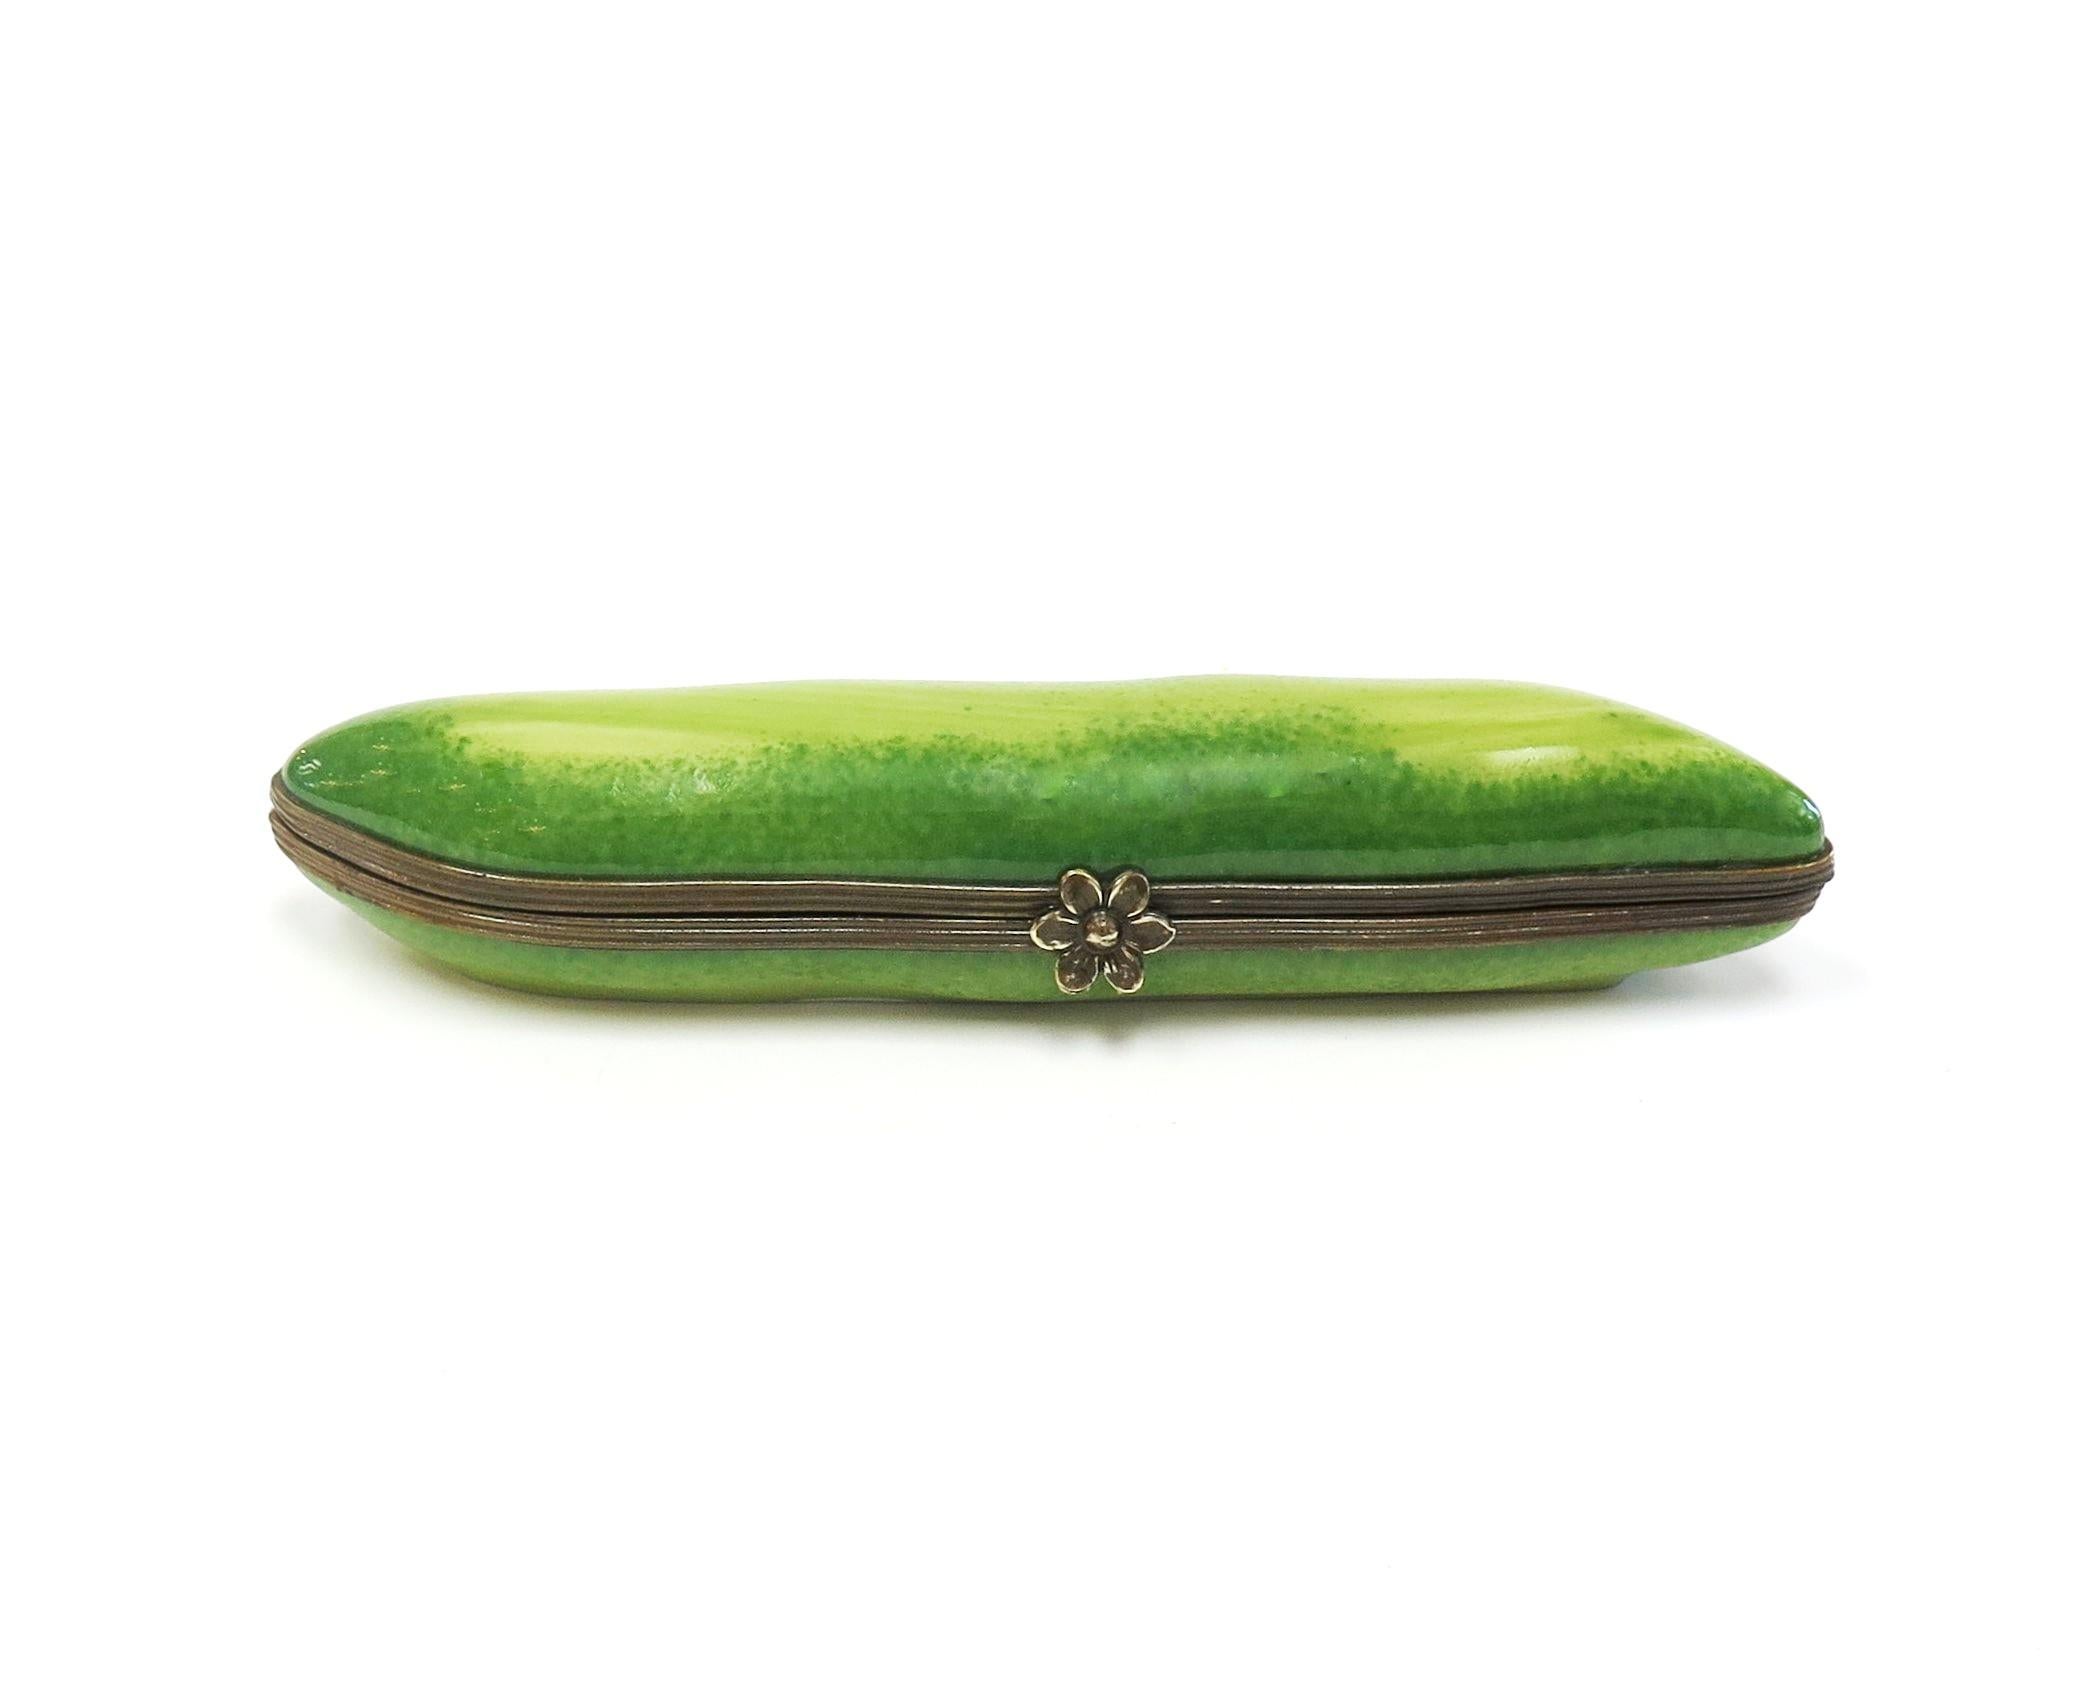 Cute pea pod-form By Tiffany & Co. opens to 7 peas. 
Porcelain with enamel
5.25